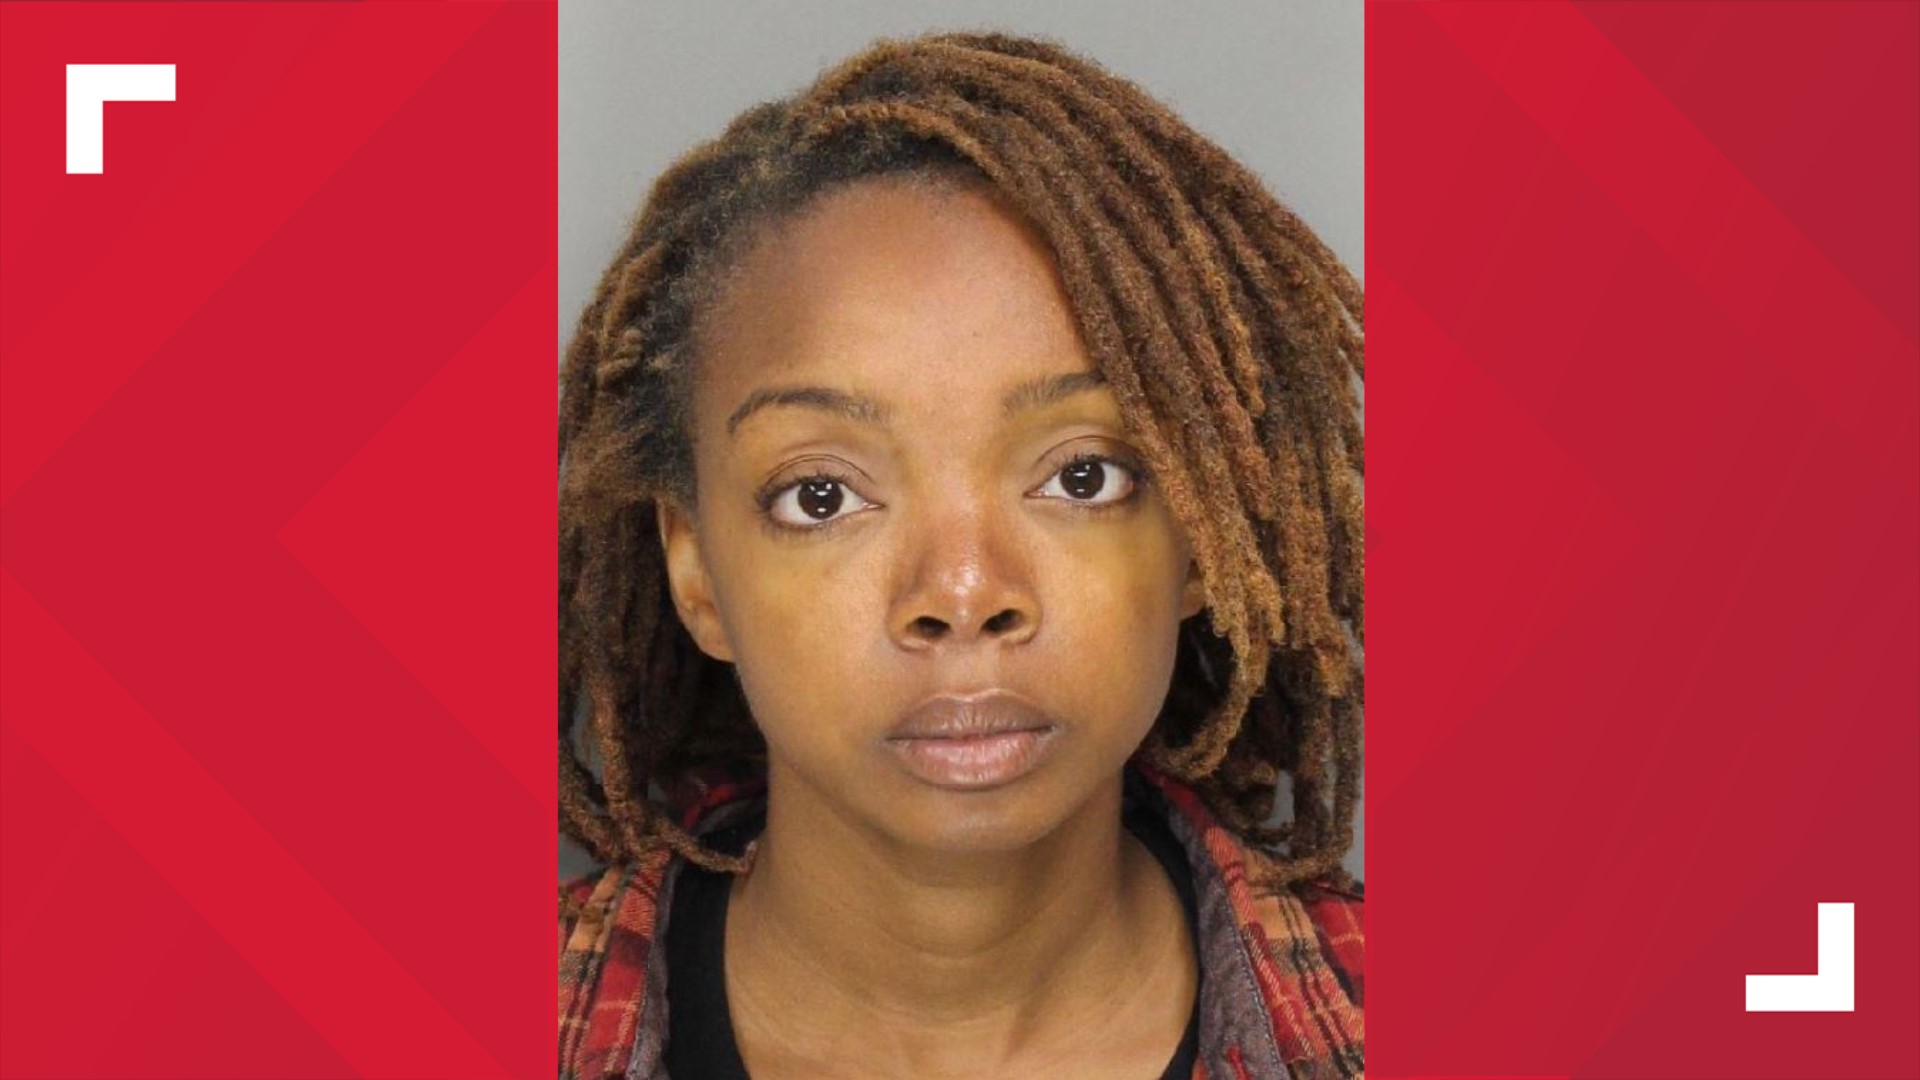 According to Cobb County Jail records, Breyanla Cooper was arrested just before 11 p.m. on Wednesday night and faces a felony concealing the death of another charge.